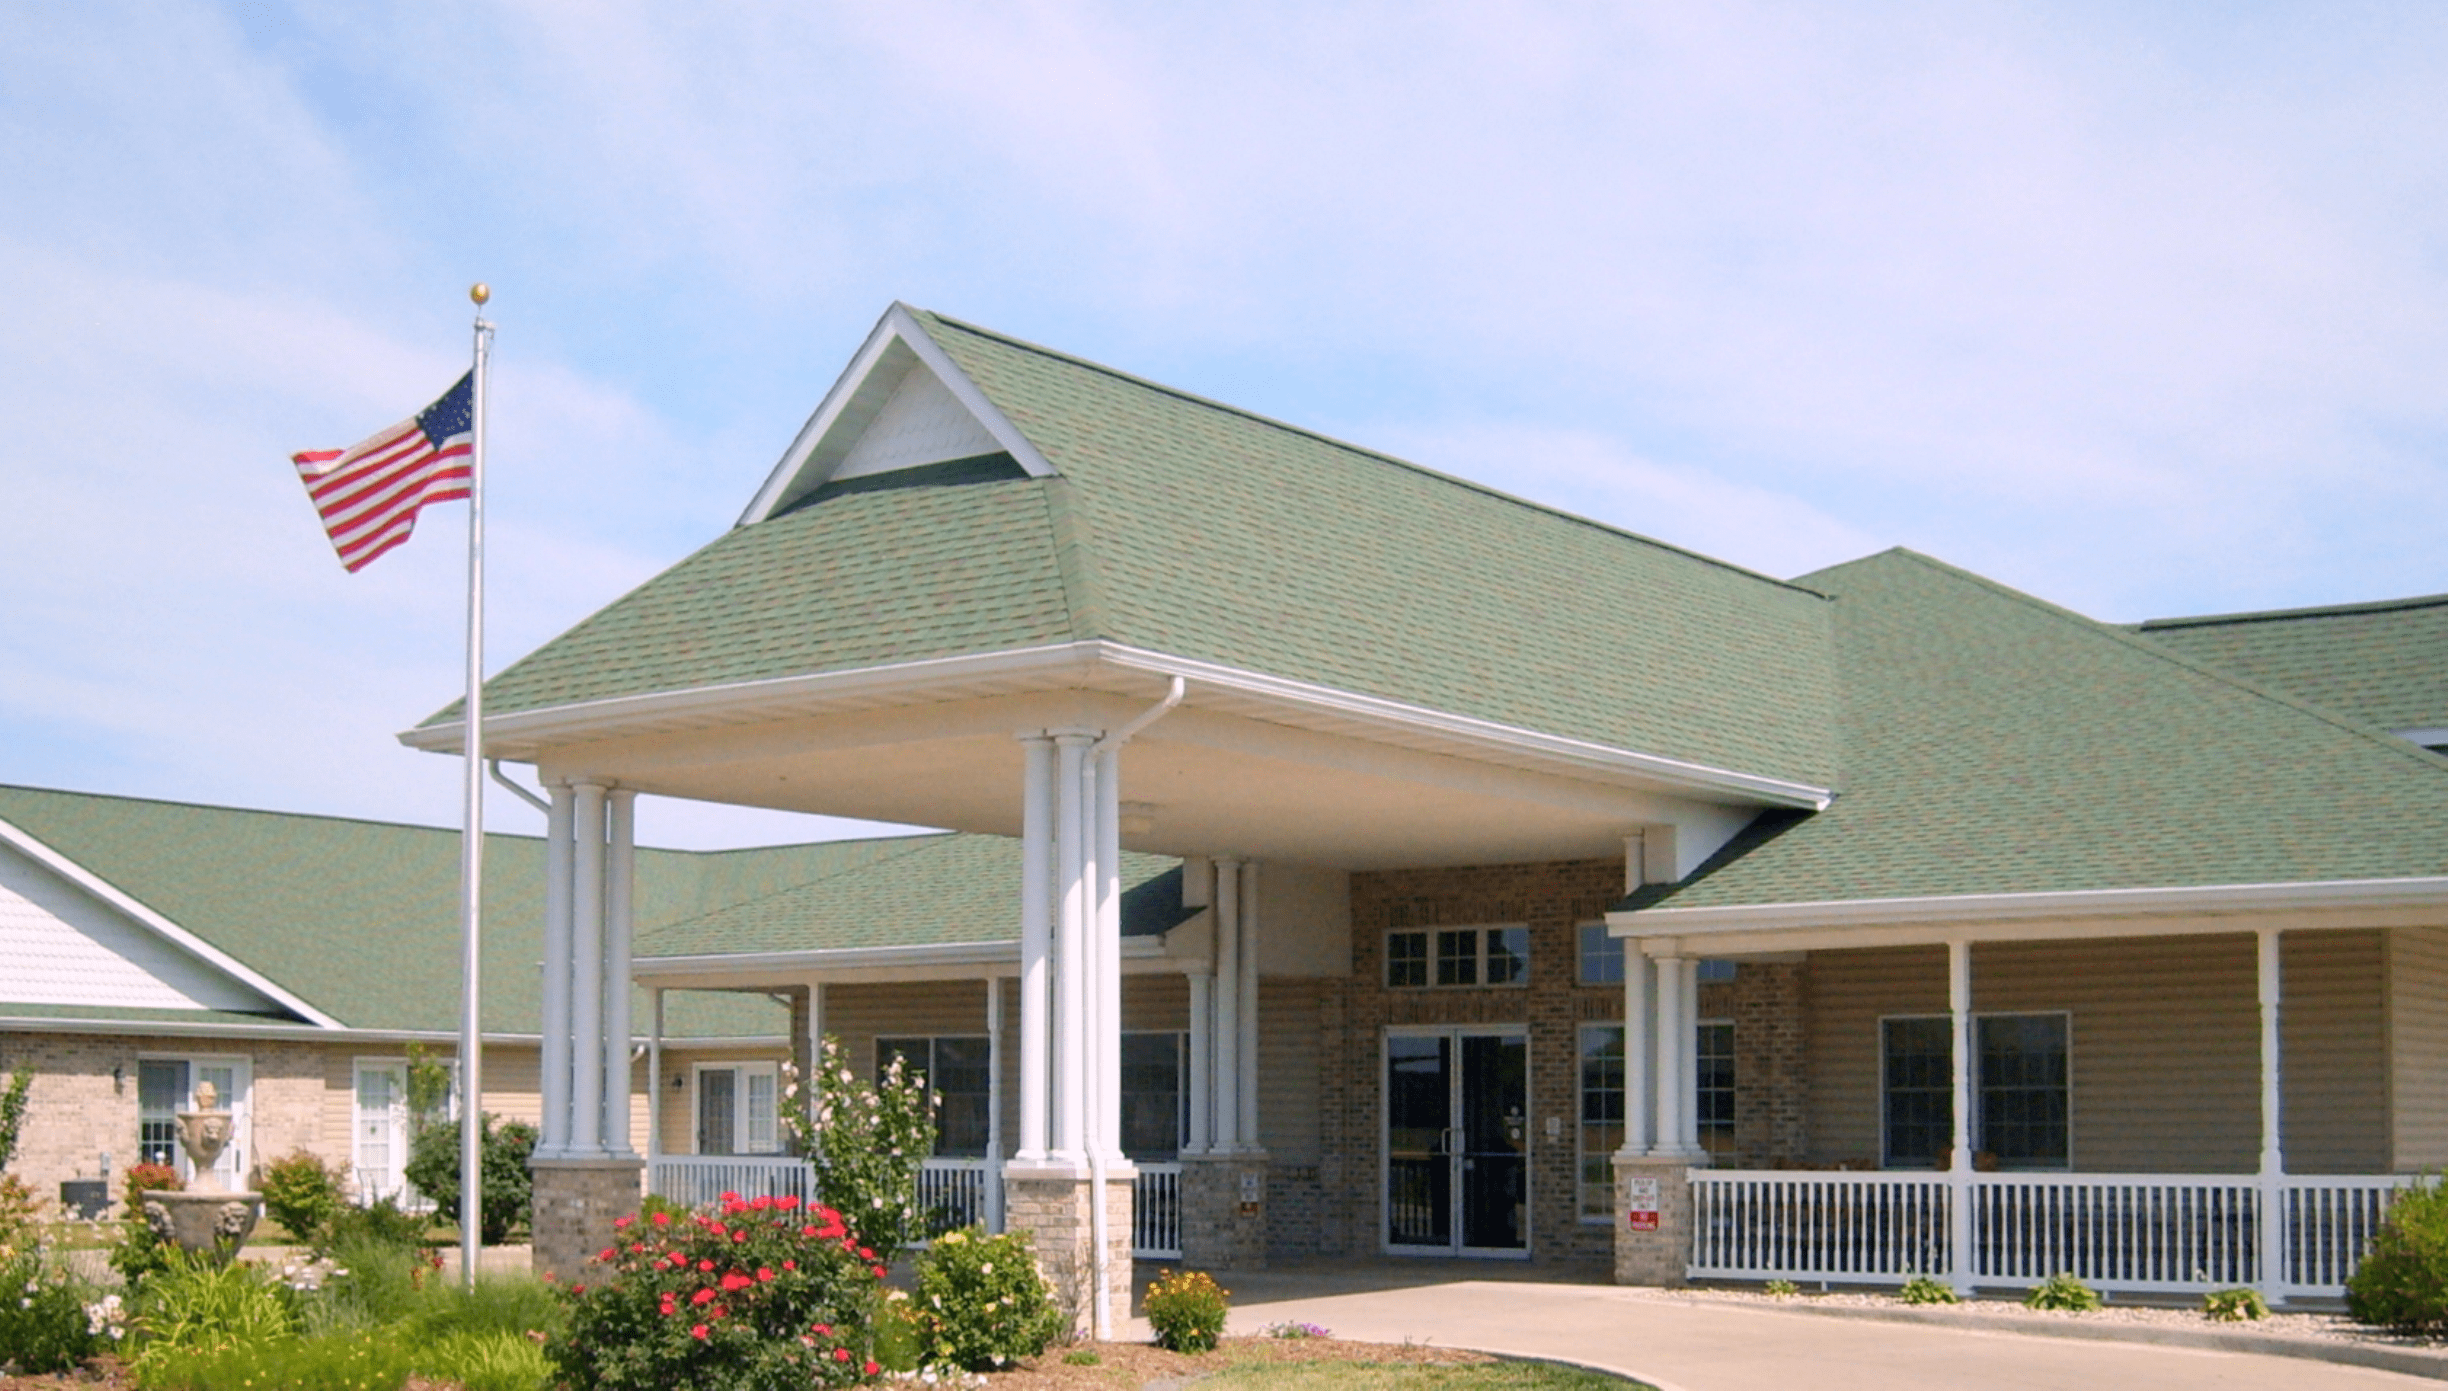 The Glenwood Supportive Living of Staunton community exterior